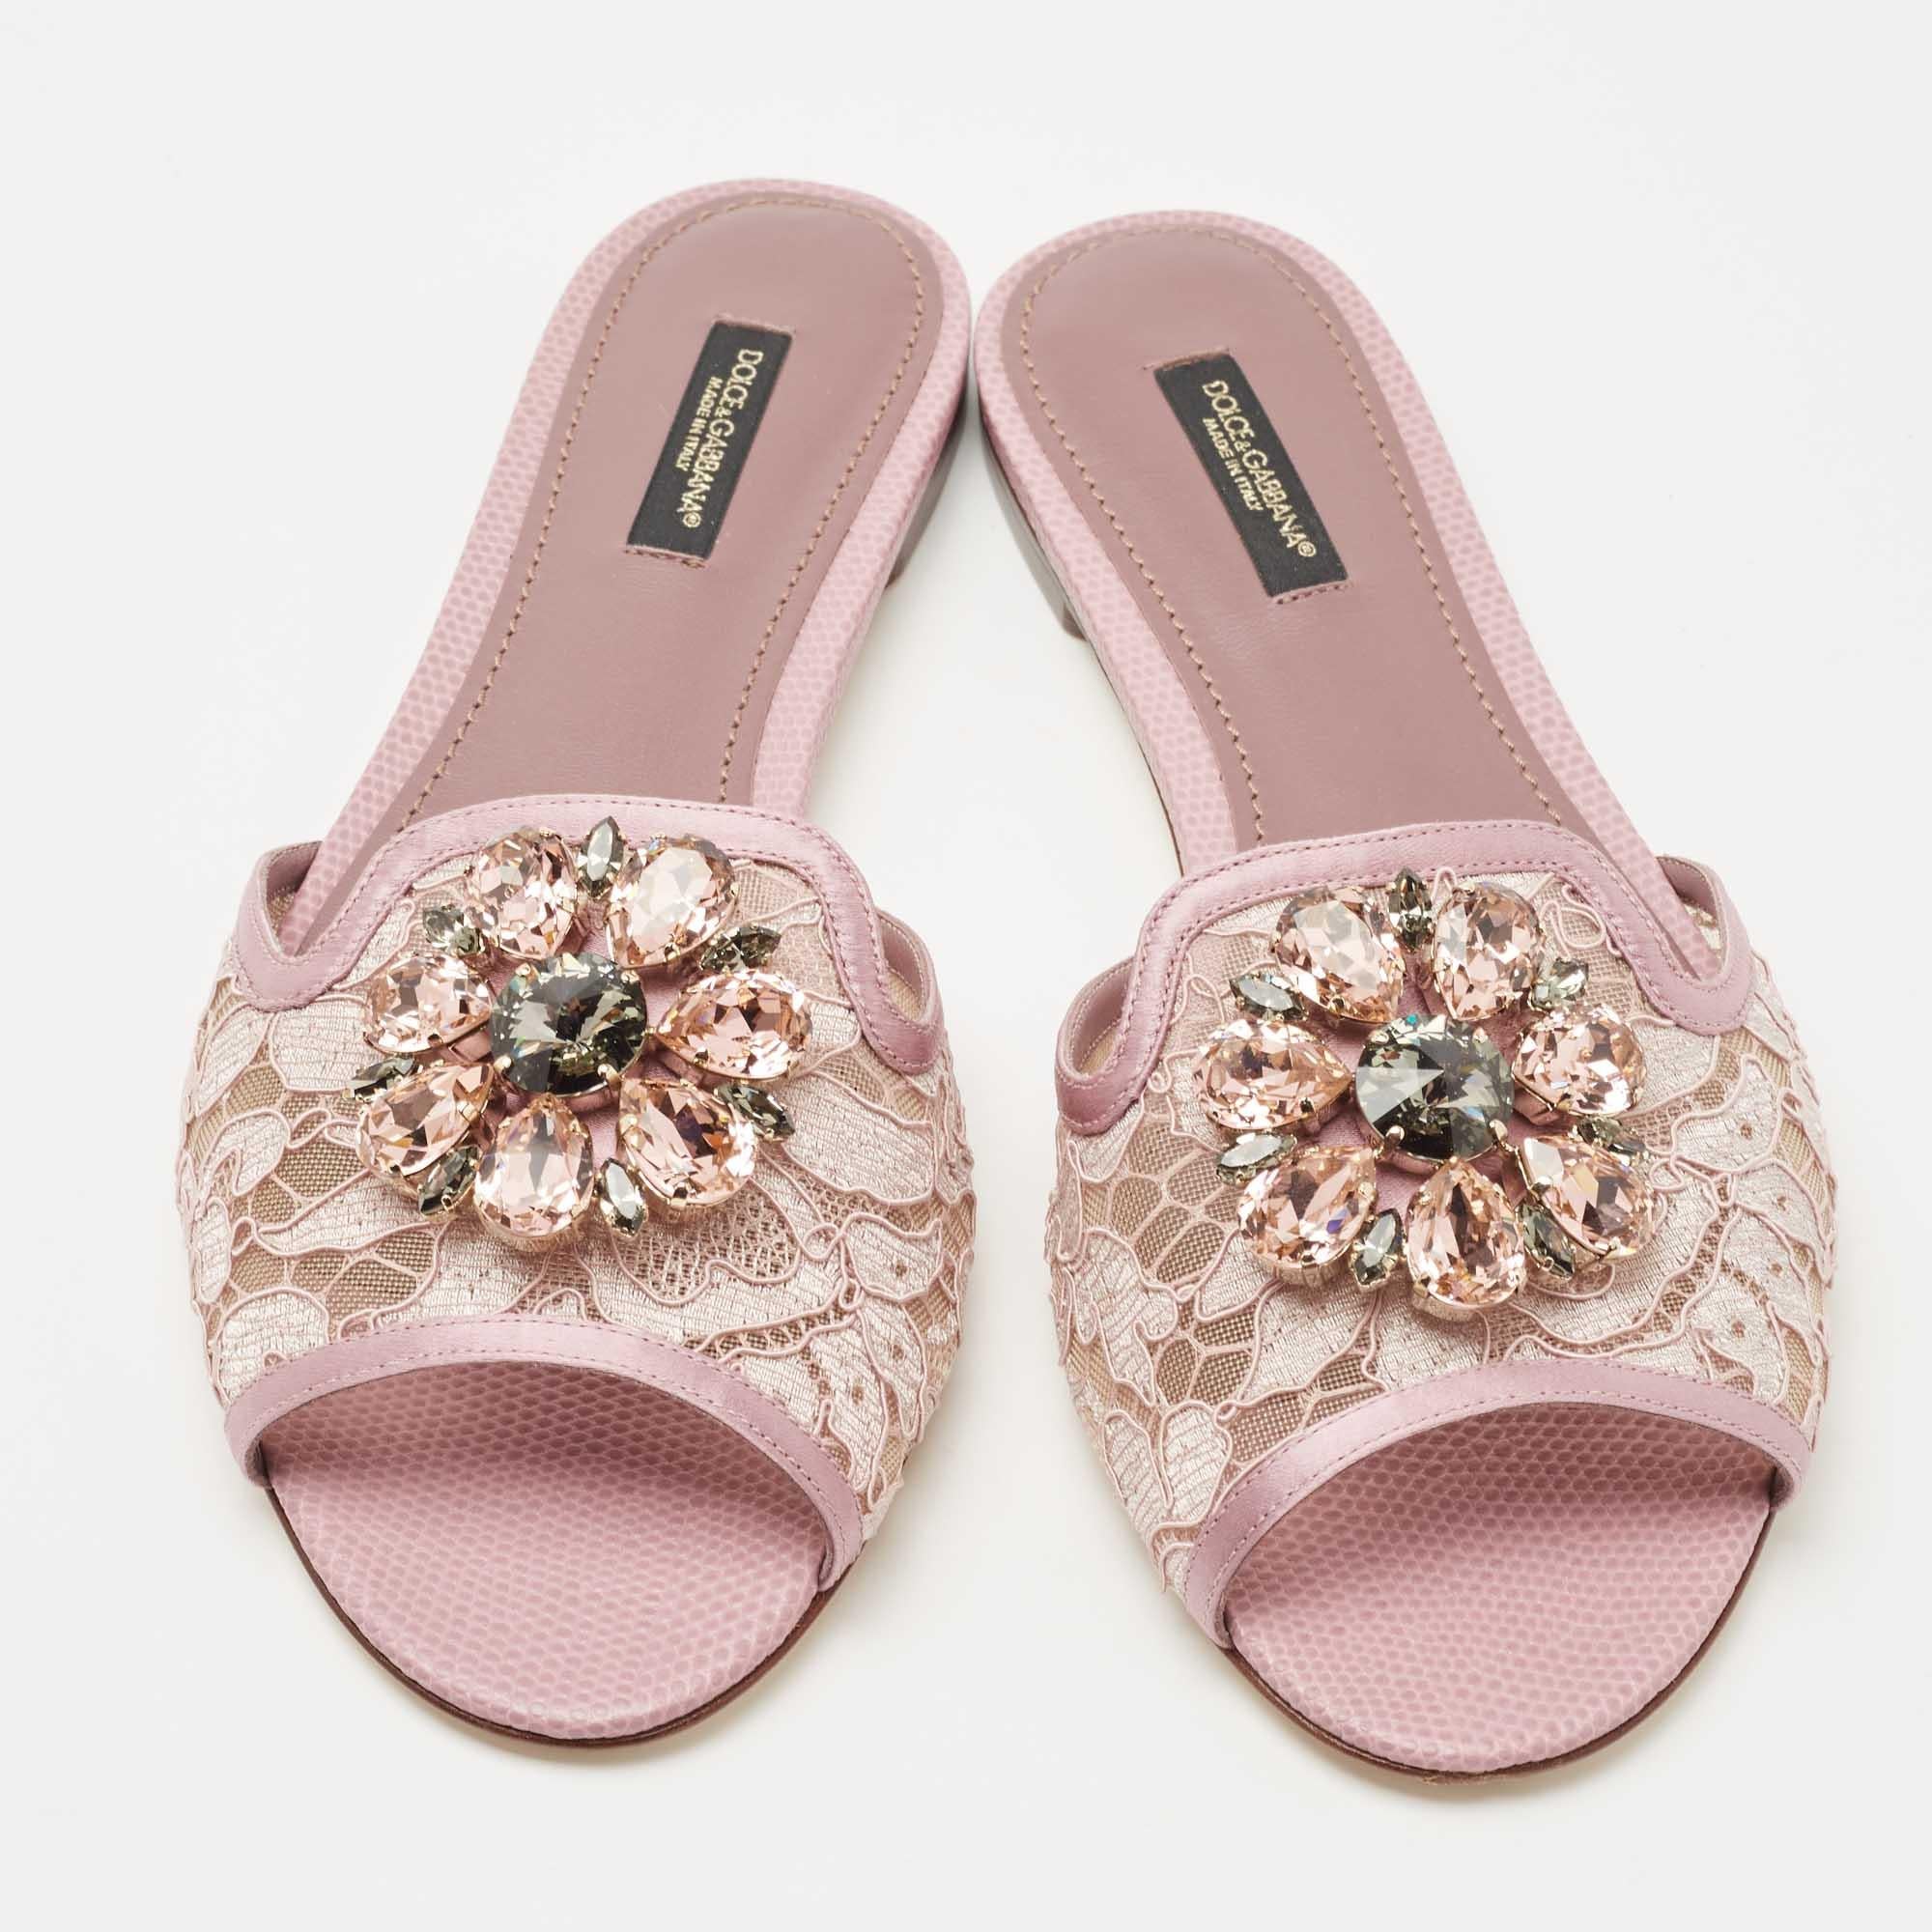 These Dolce & Gabbana slides have a lace upper and a leather base. What makes these slides so desirable is the breathtaking cluster of crystals on the vamps. This is definitely one pair that speaks beauty in a nonchalant way.

Includes: Original